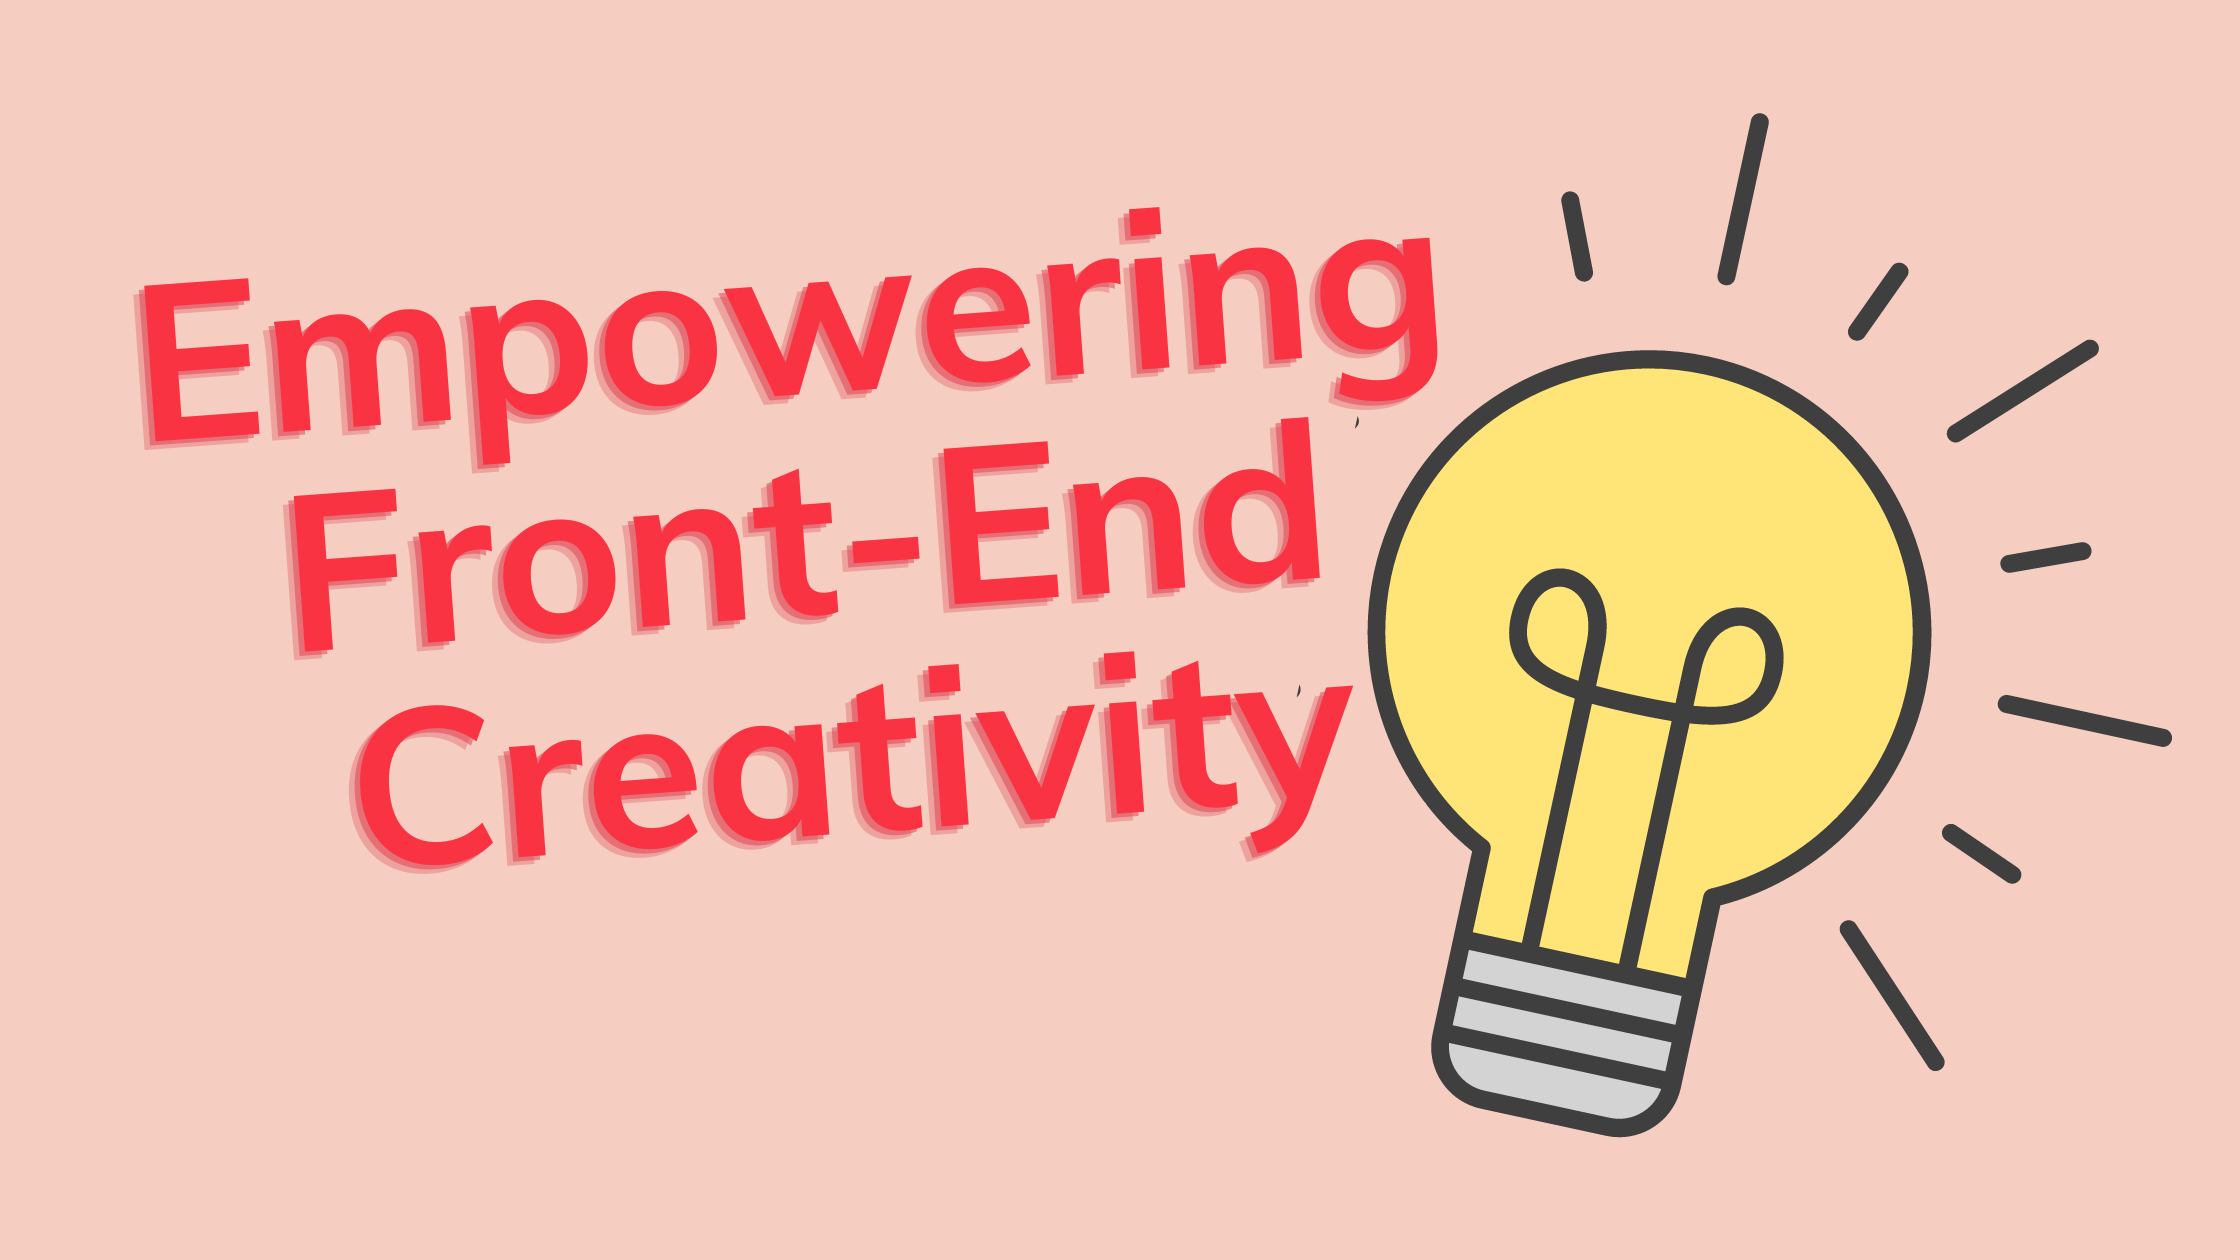 Empowering Front-End Creativity